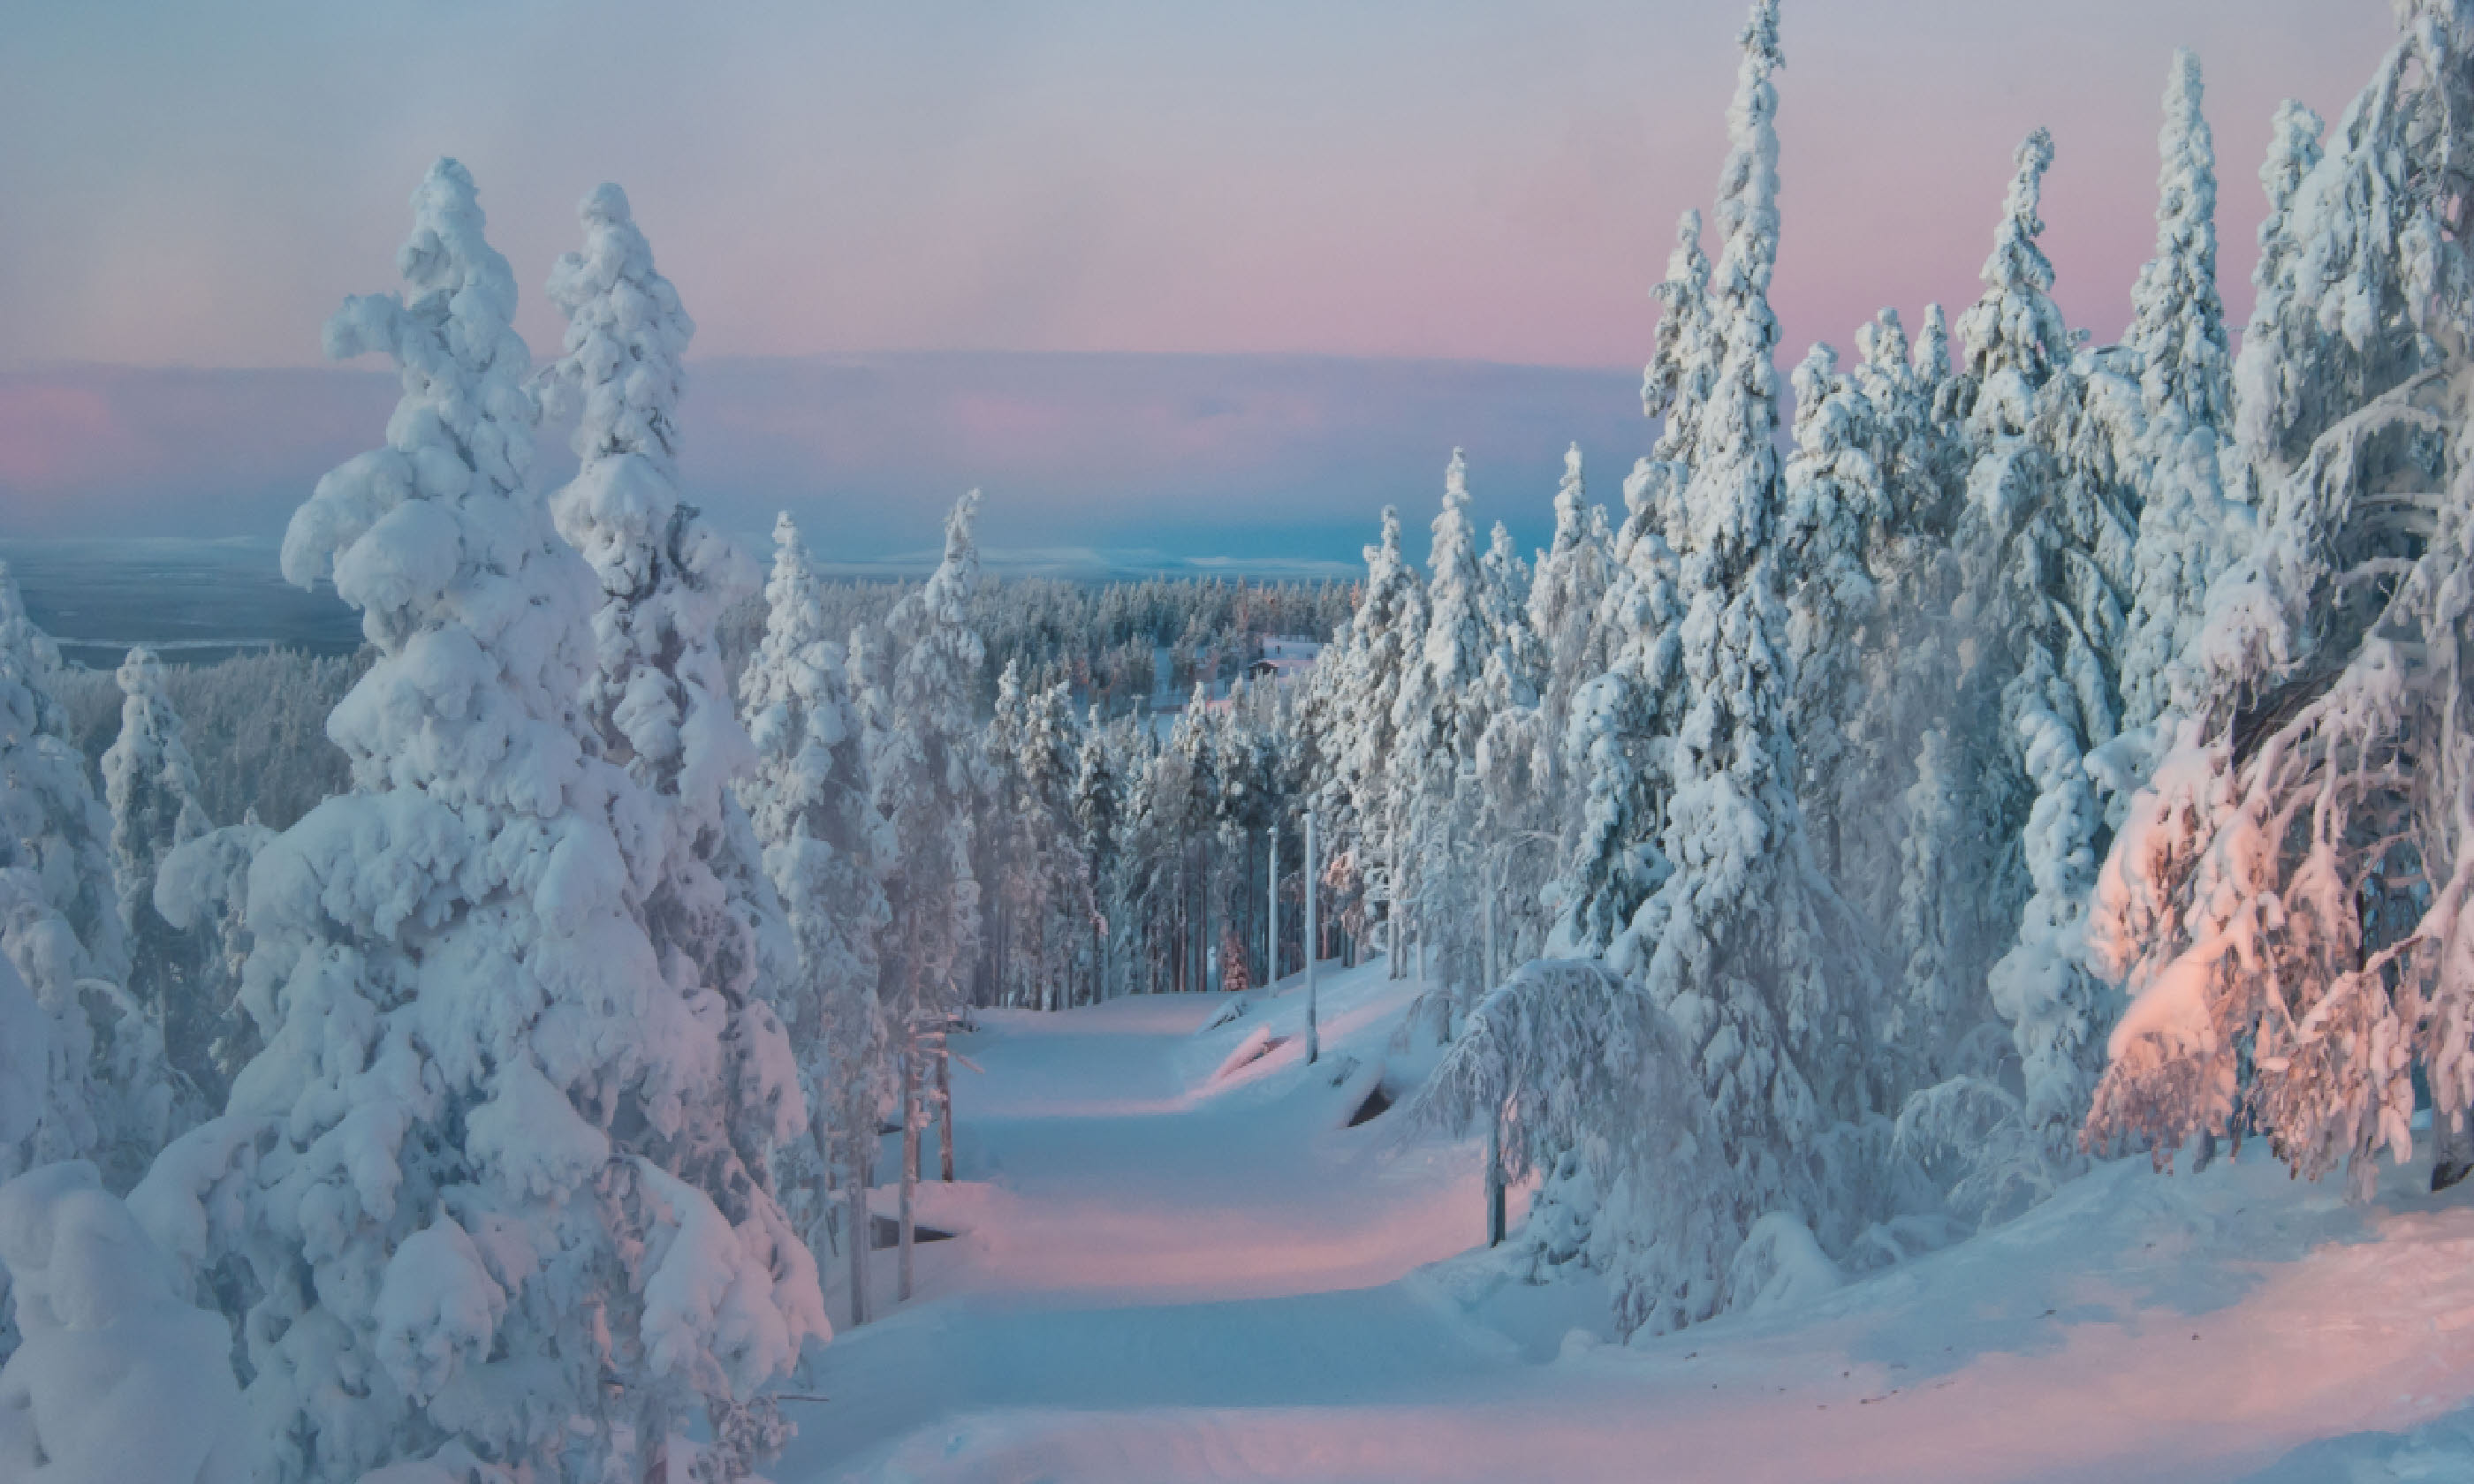 Trees at sunset in winter, Finland (Shutterstock)